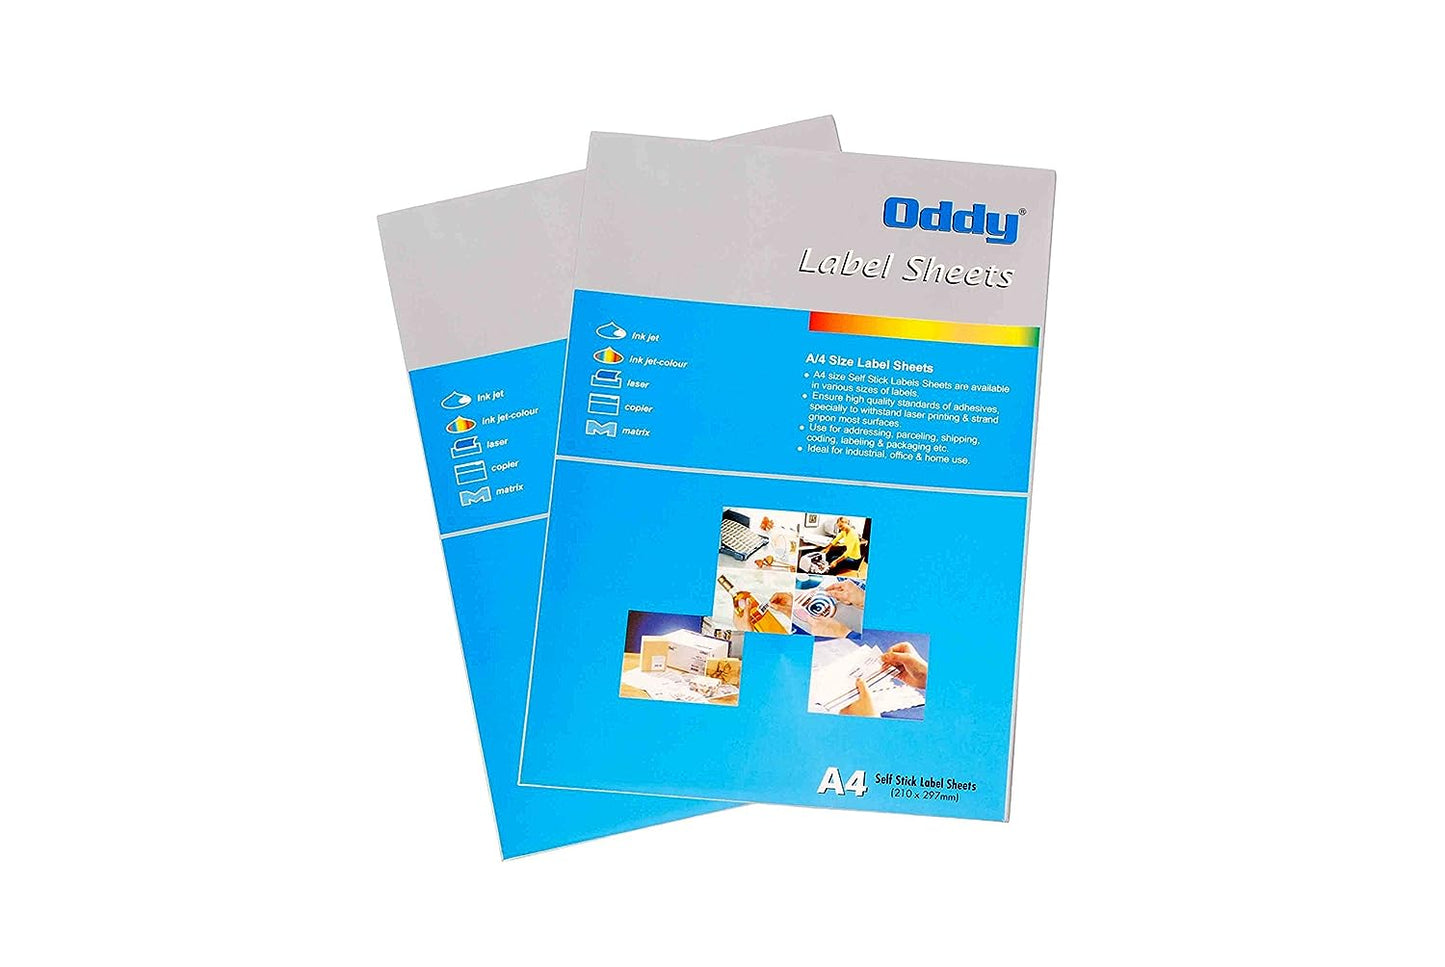 Oddy A4 Paper Label Stickers for Laser & Inkjet Printers | 14 Labels per Sheet - Pack of 100 Sheets | for Shipping, Address, Folders, Industrial use